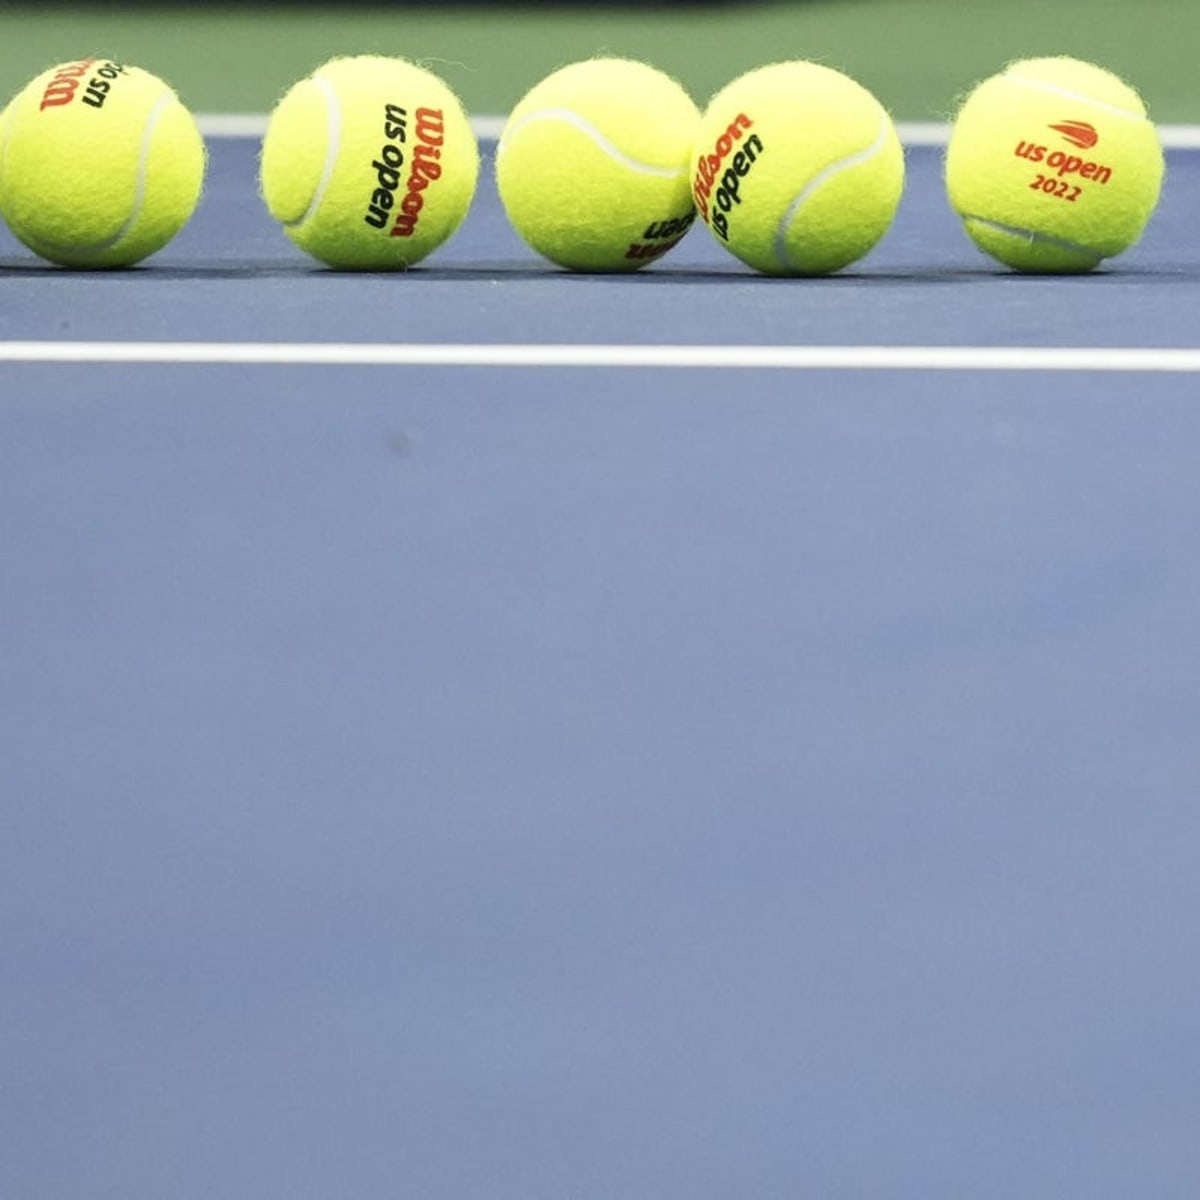 Watch Charleston Open WTA doubles final Stream tennis live - How to Watch and Stream Major League and College Sports